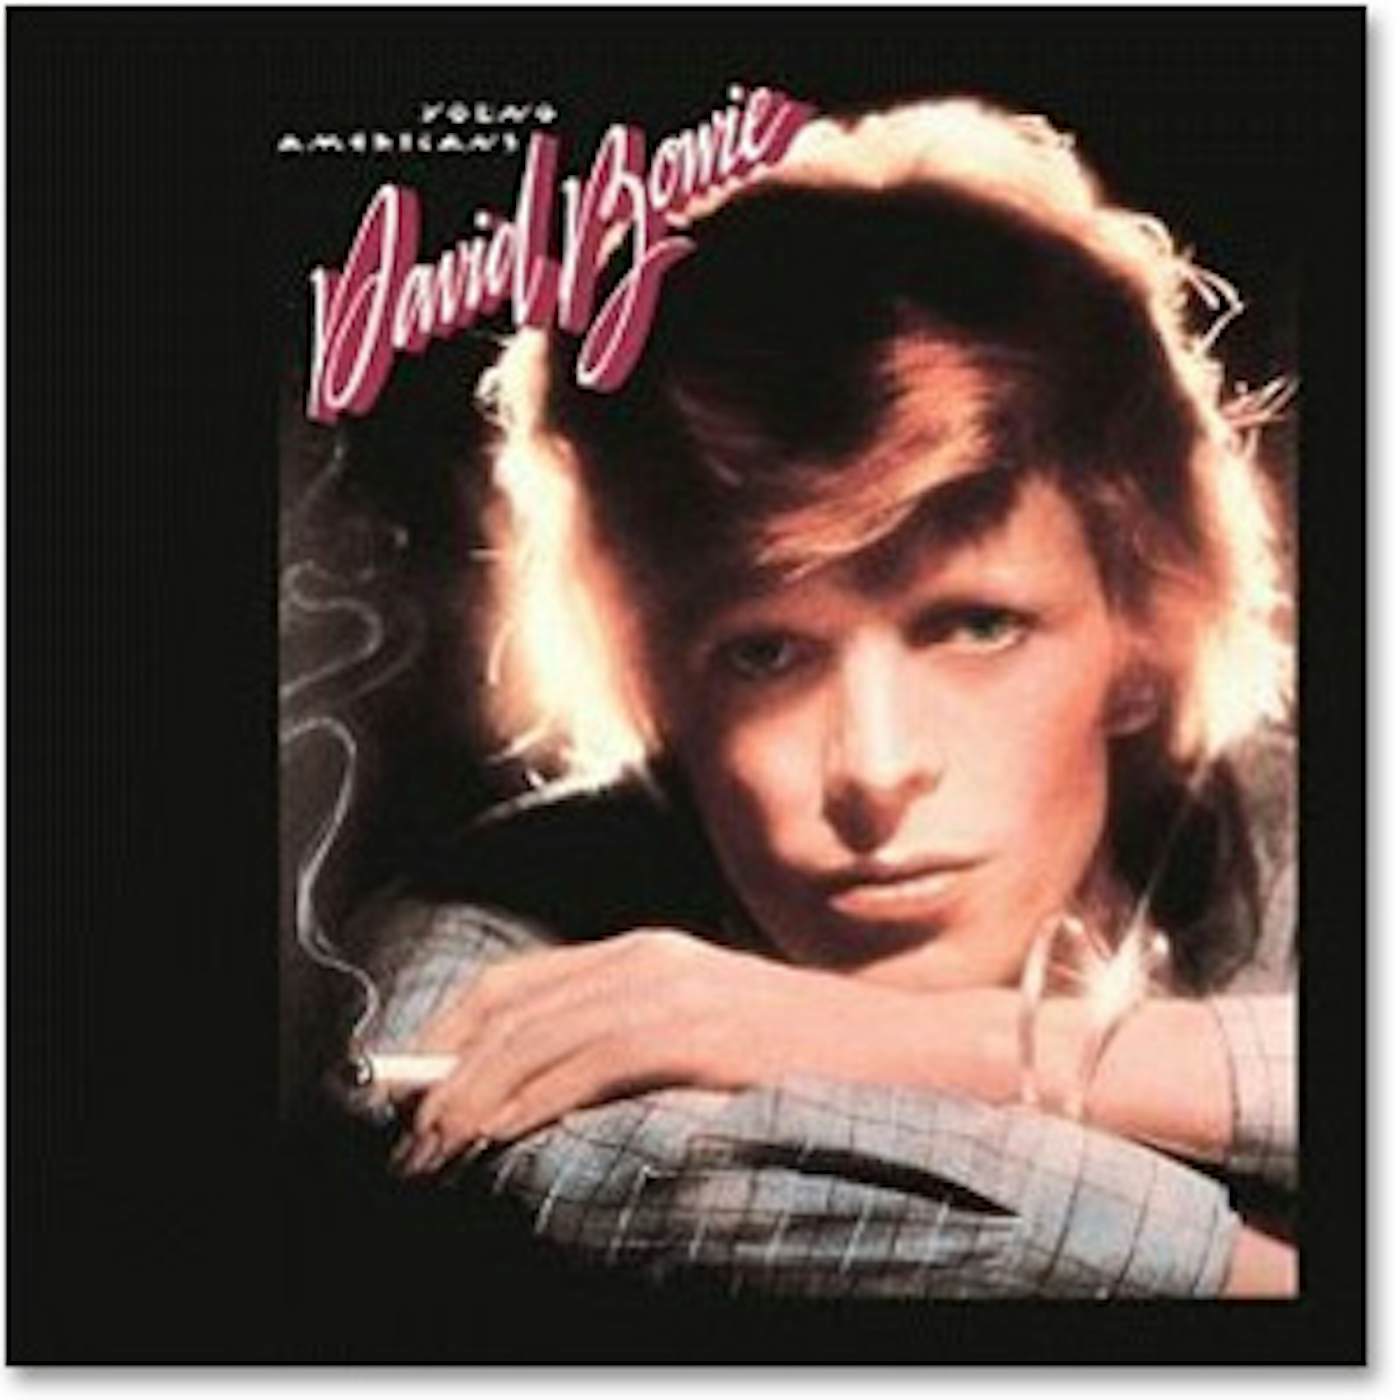 David Bowie Young Americans CD (1975)